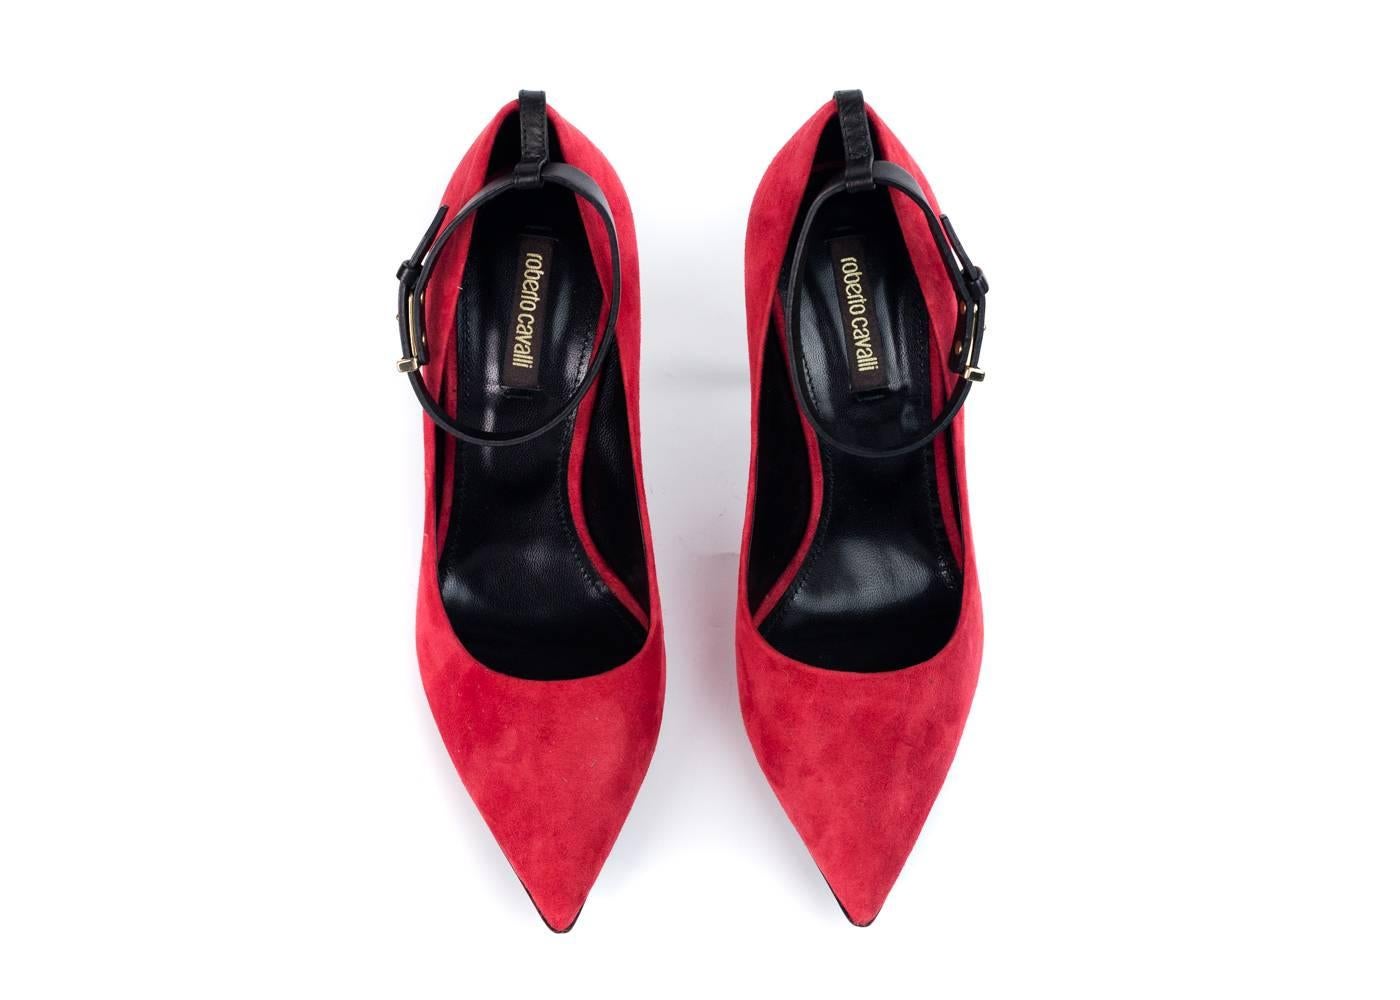 Brand New Roberto Pumps
Original Box & Dust Bag Included
Retails in Stores & Online for $790
Size IT 37 / US 7 Fits True to Size

Roberto Cavalli's luxurious red suede pumps feature a gold hardware, leather ankle straps, leather trimming in the